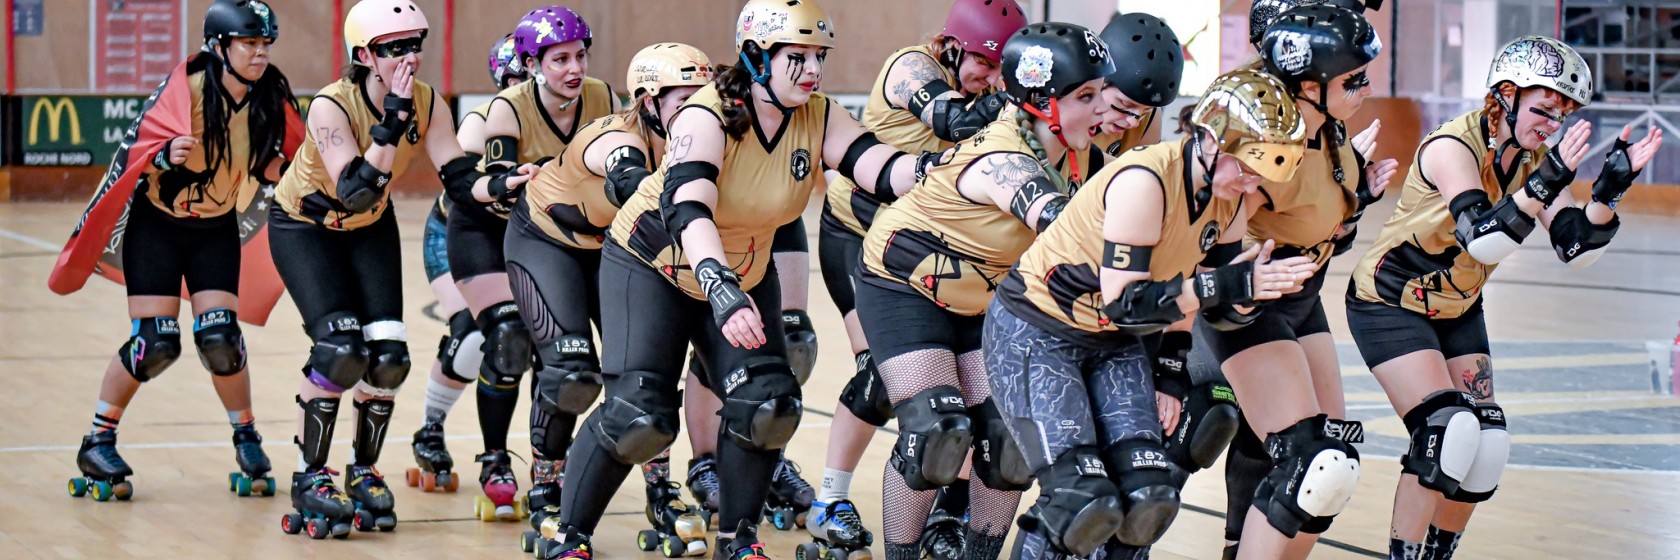 ROLLER DERBY PICTURES NATIONALE 2